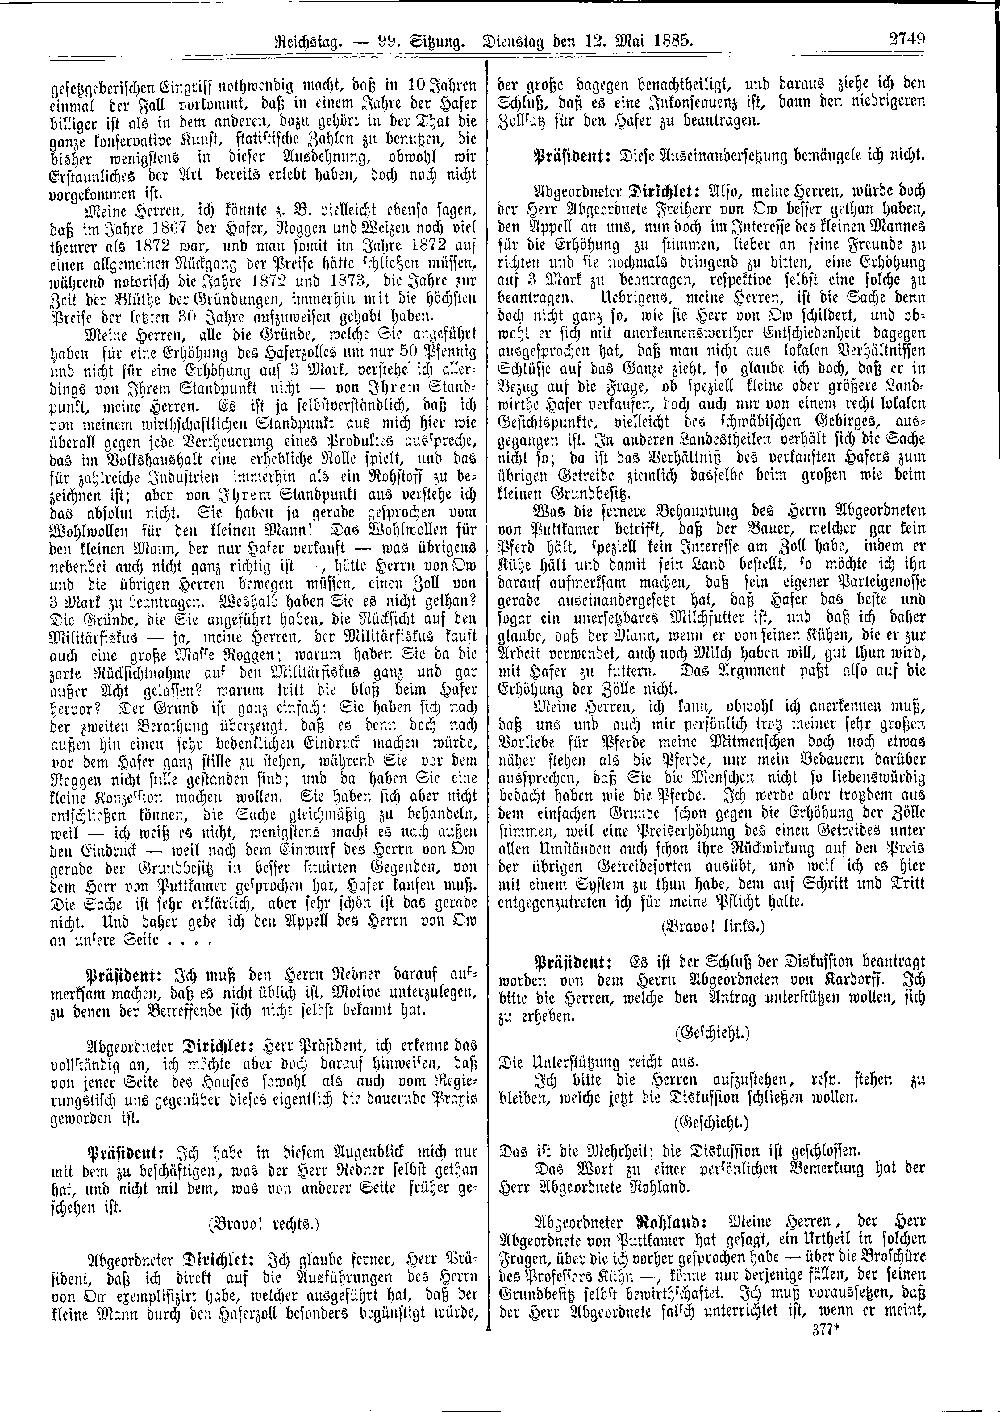 Scan of page 2749